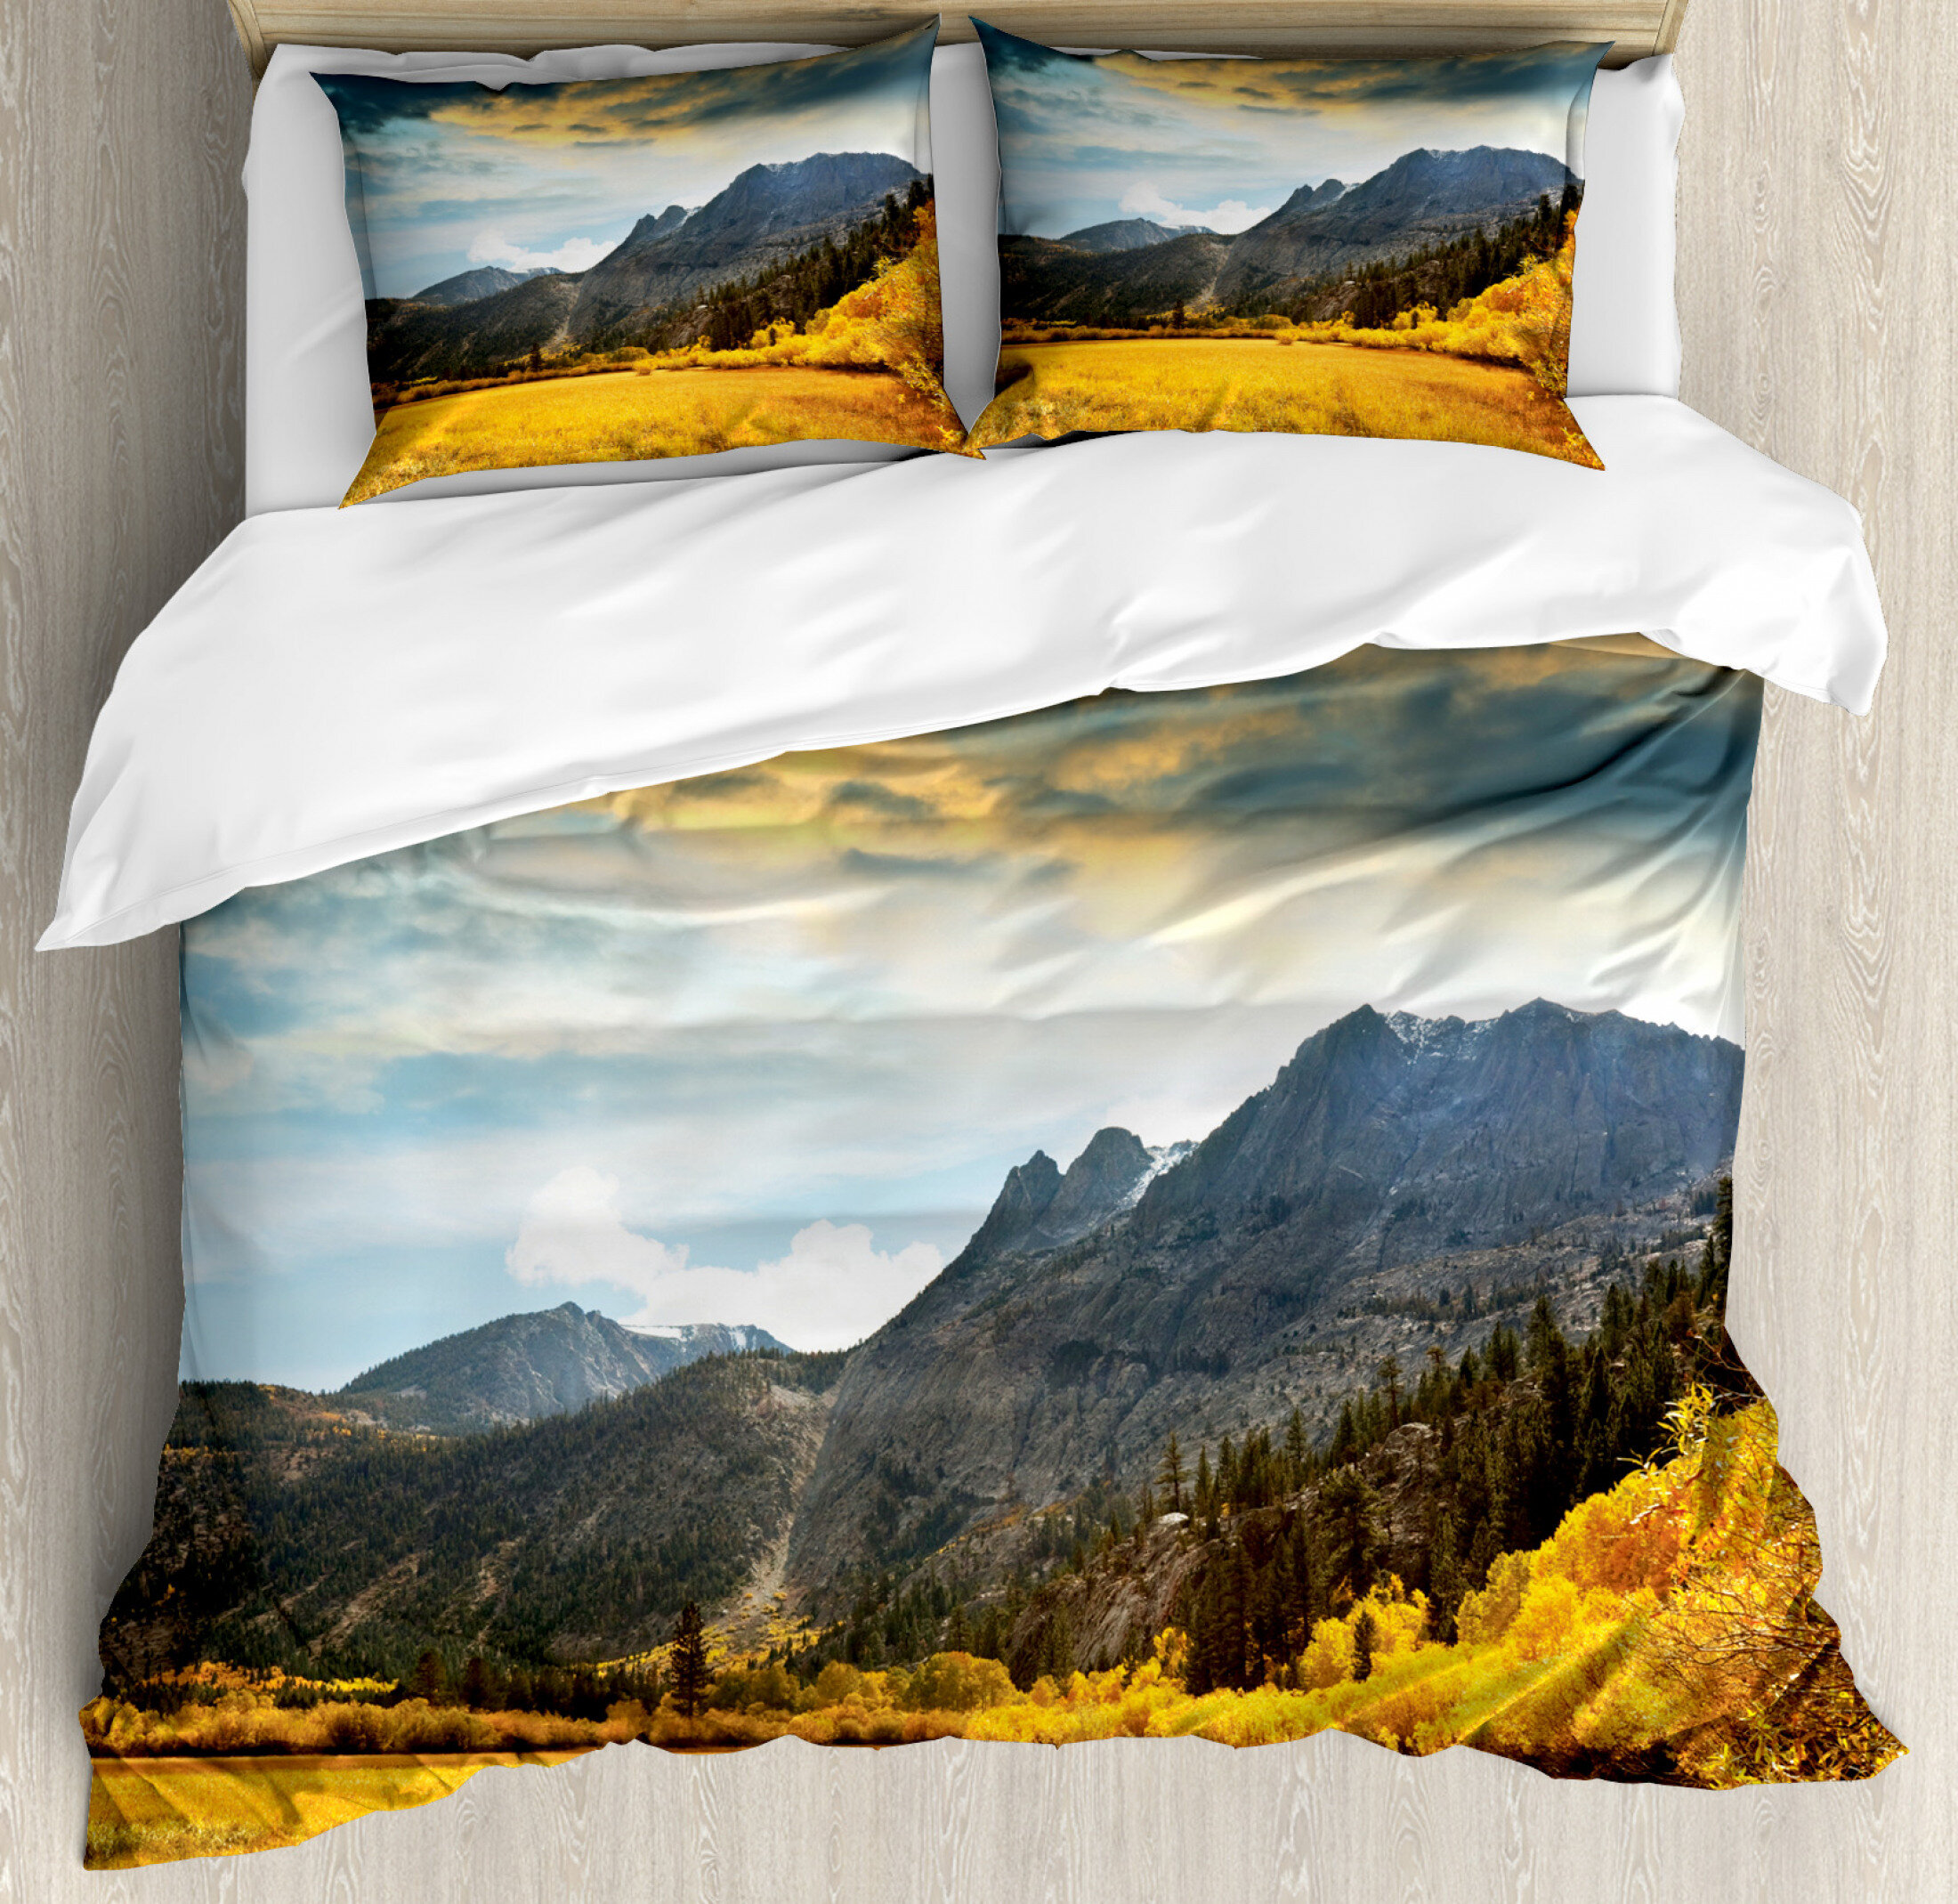 East Urban Home Ambesonne Woodland Duvet Cover Set Autumn In